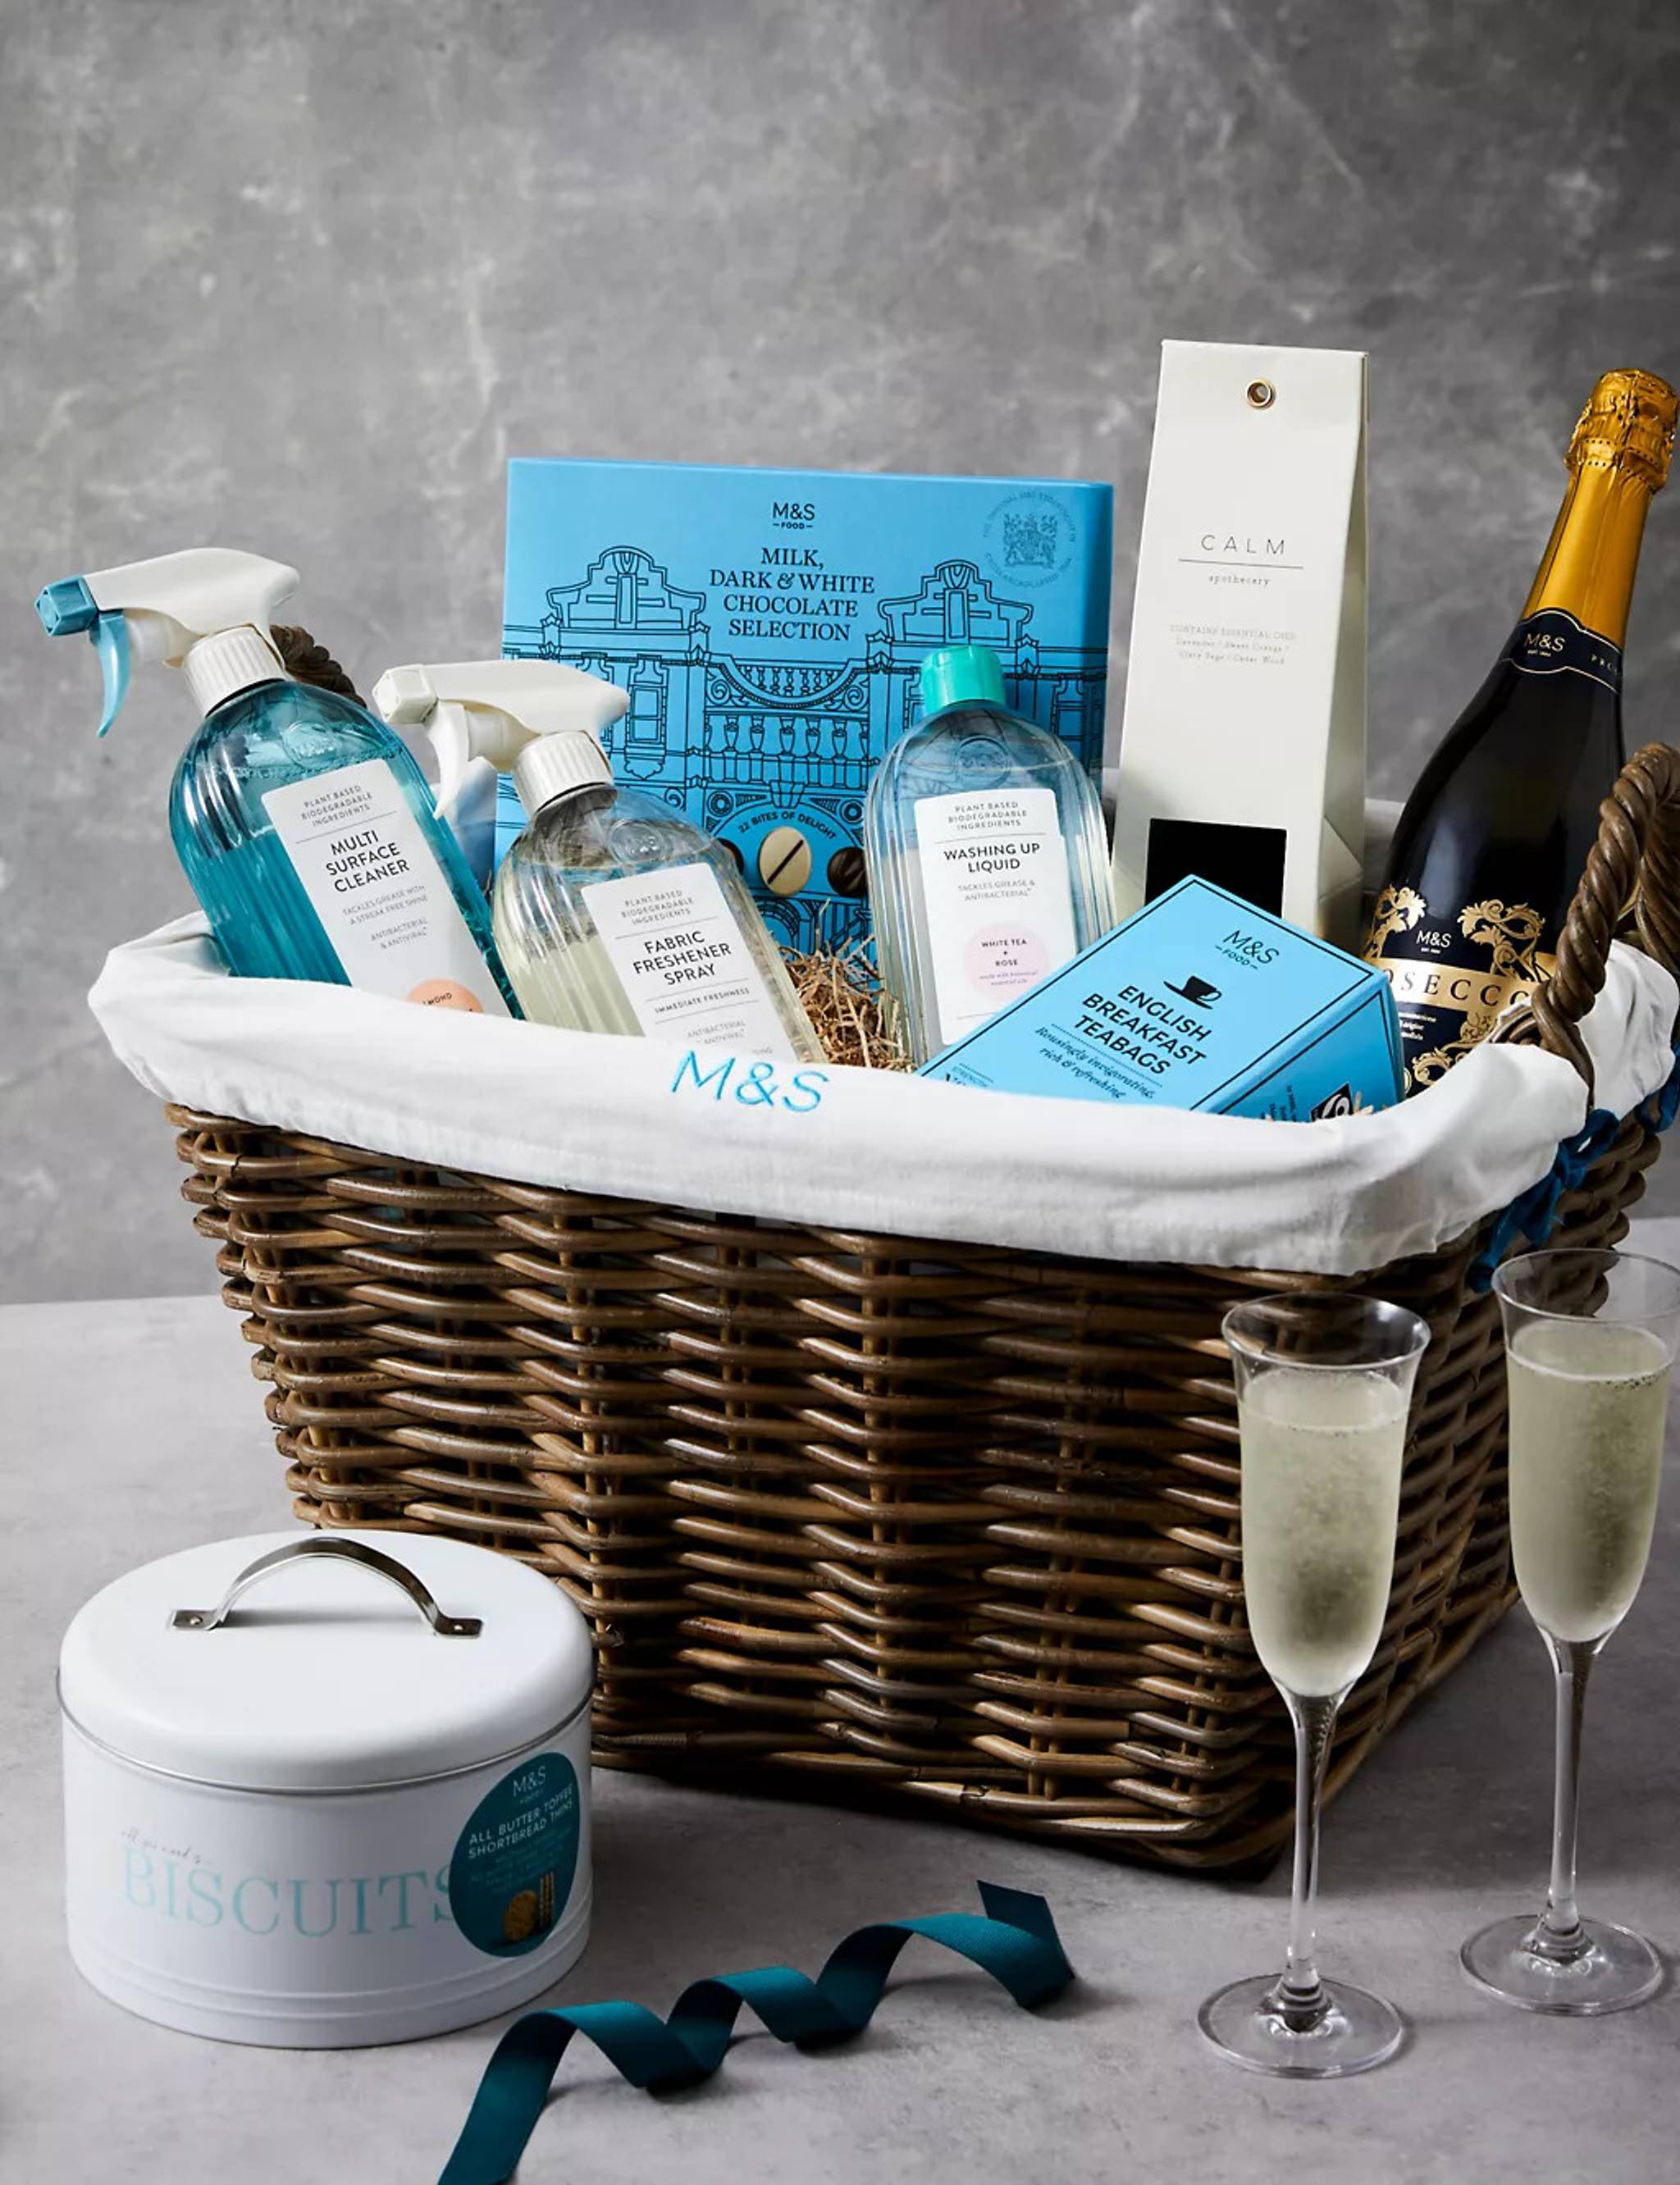 M&S: bringing a luxury feel to home cleaning